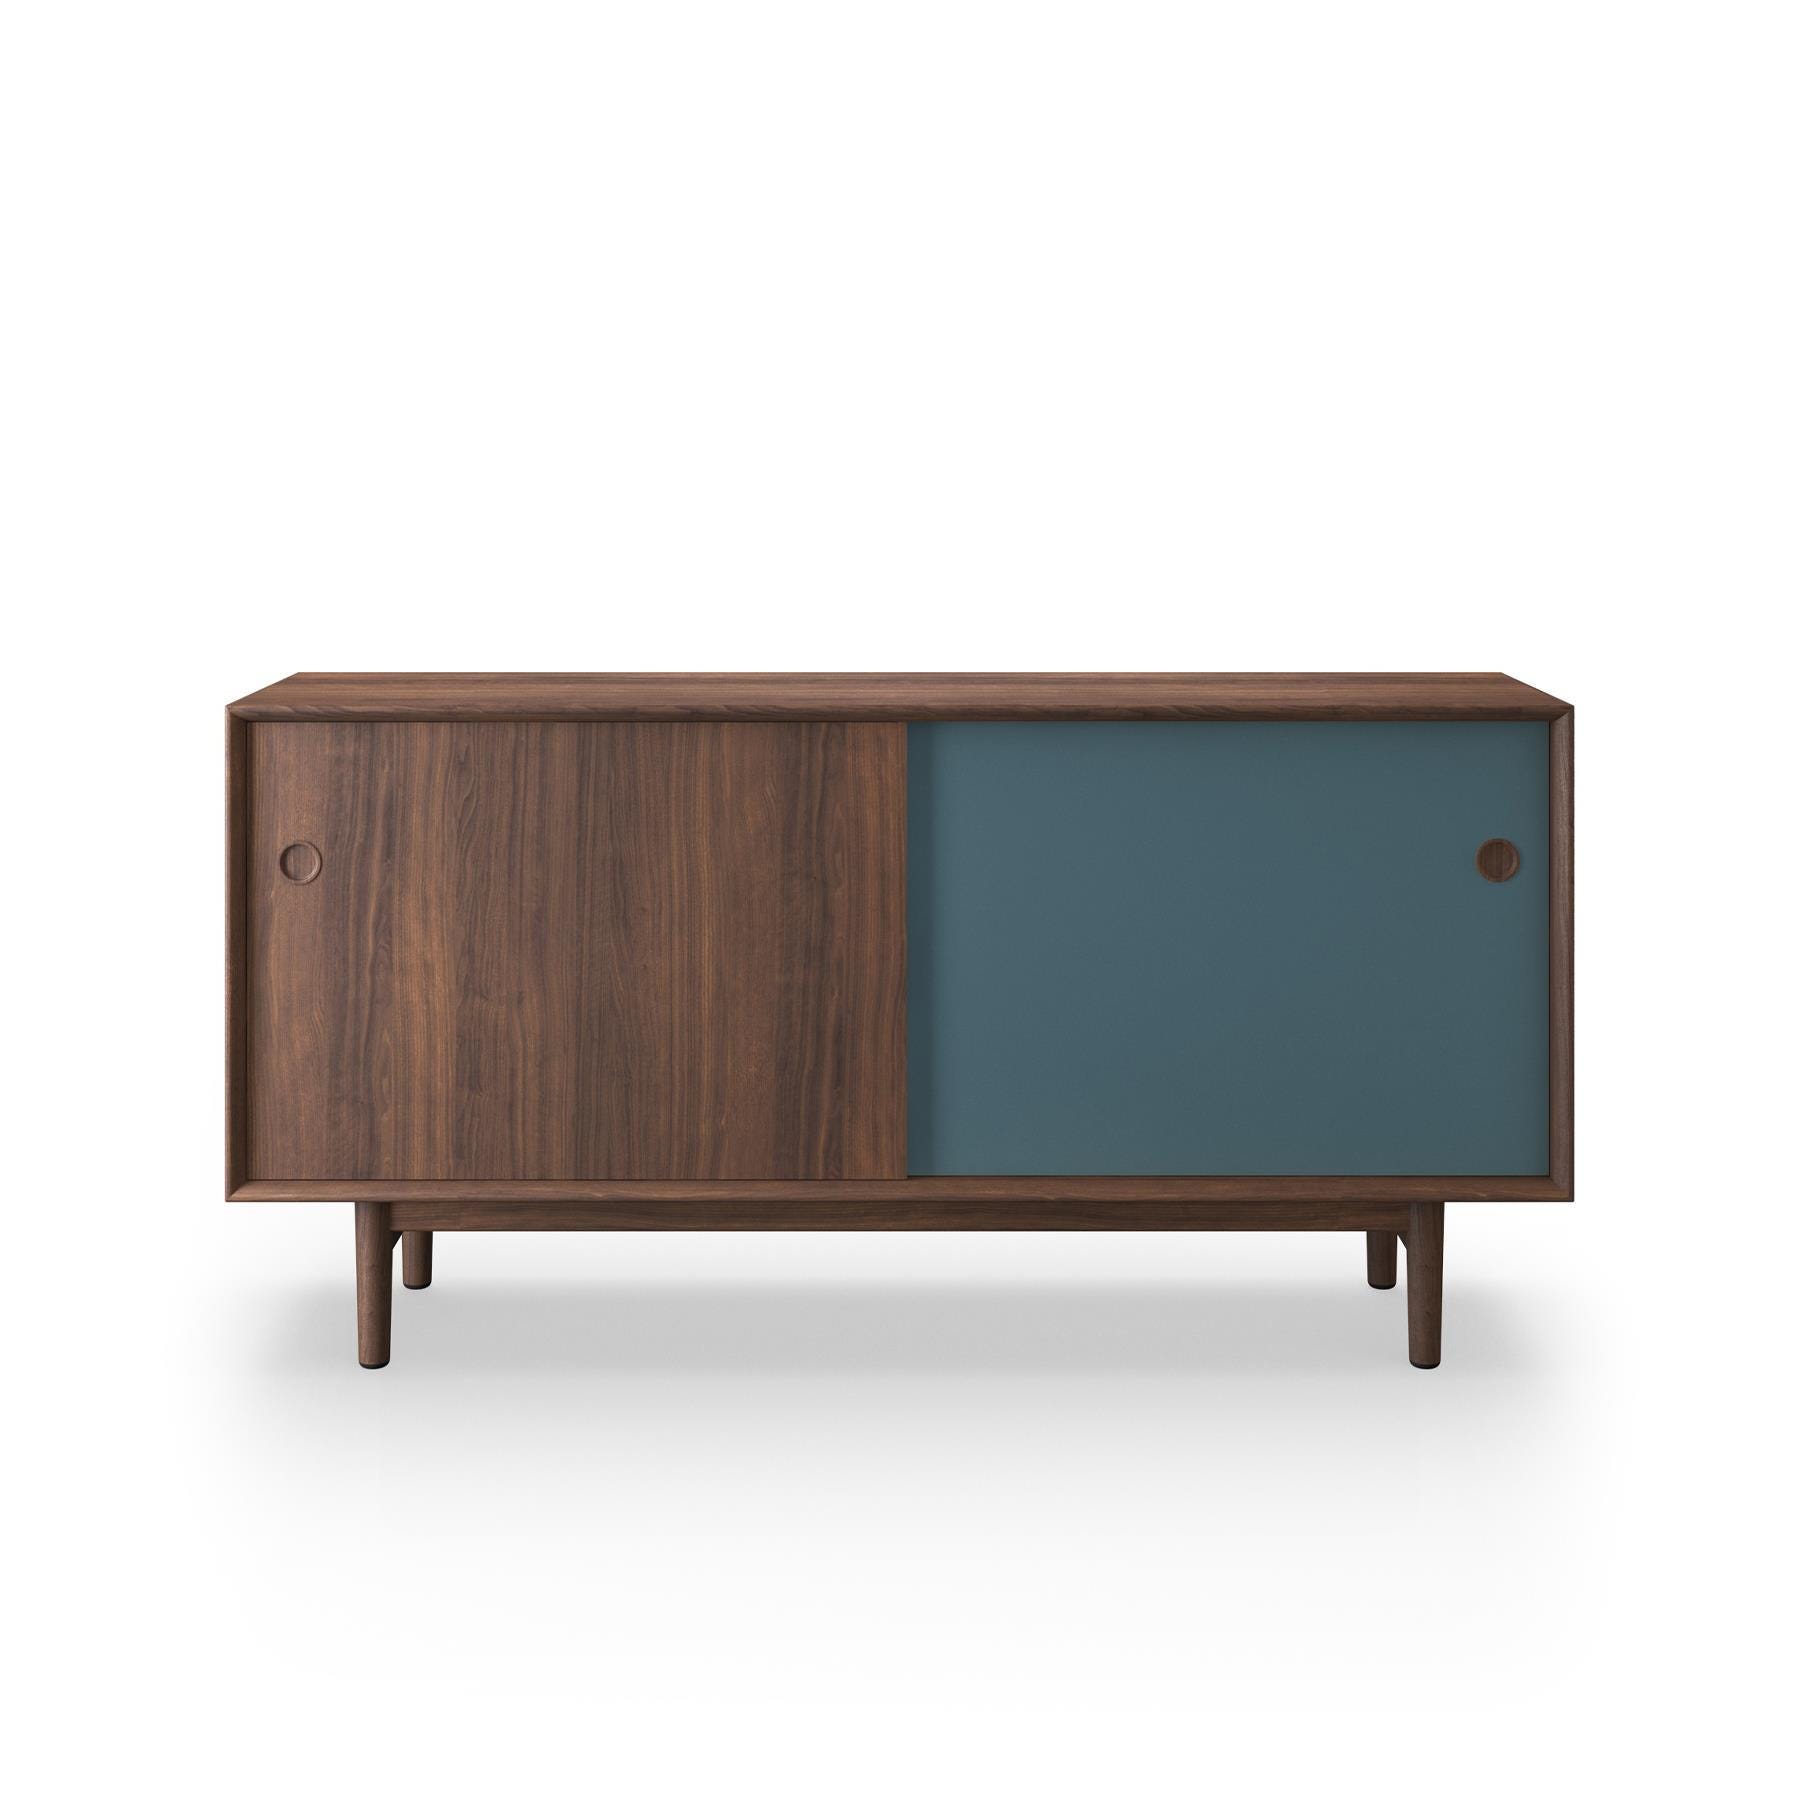 Sibast No 11 Sideboard Walnut Blue And Natural Front Wooden Legs Dark Wood Designer Furniture From Holloways Of Ludlow